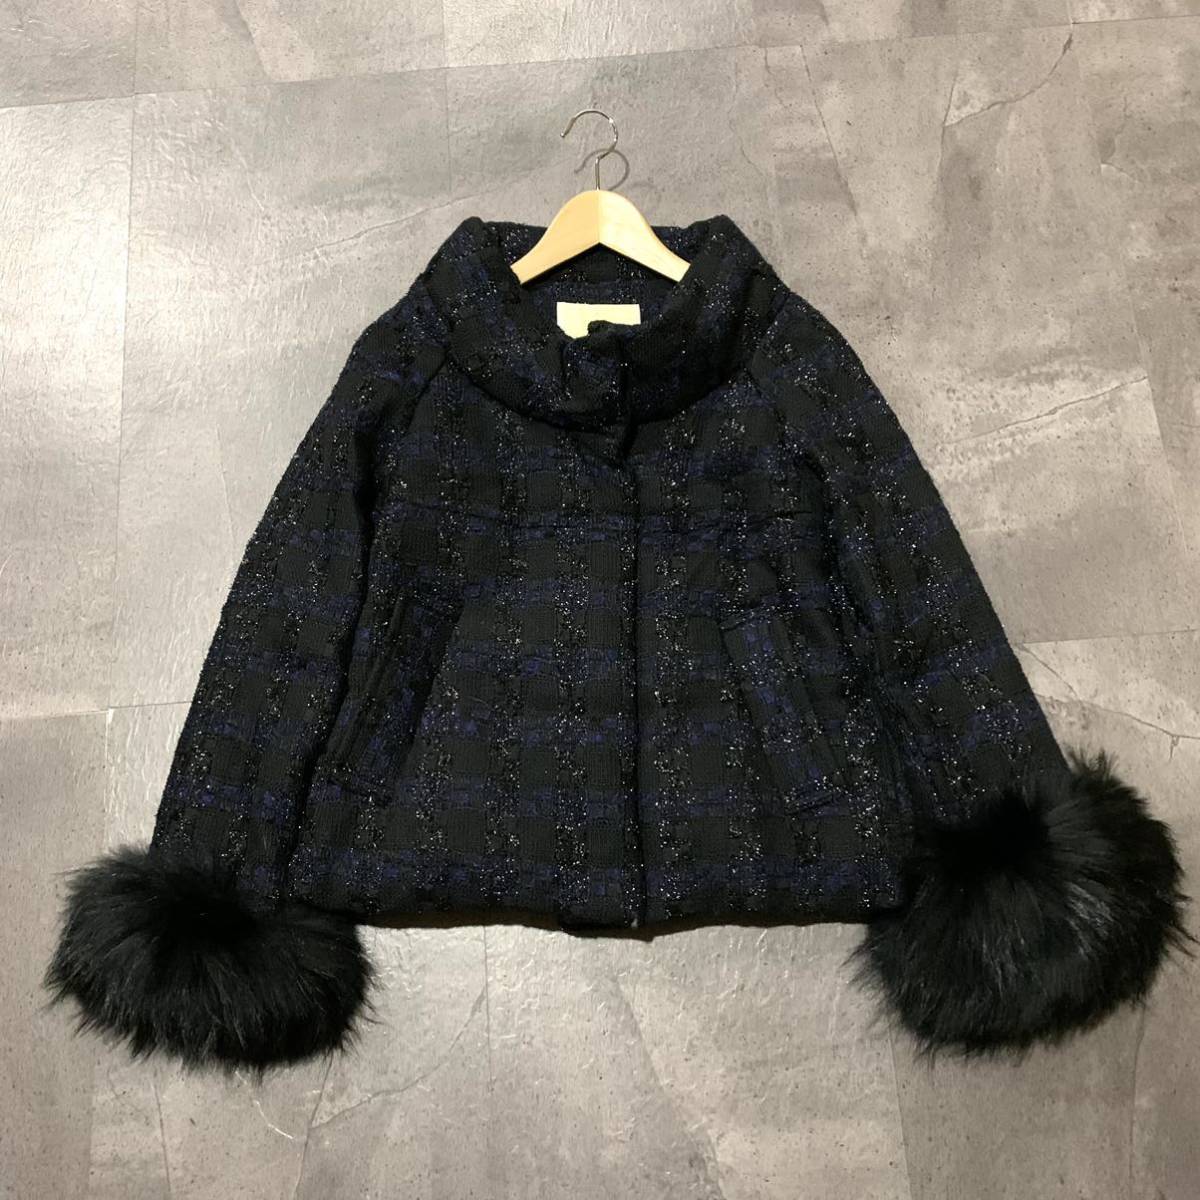 QQ* beautiful goods / high class elegant clothes \' finest quality DOWN90% use \' GRACE CLASS Grace Class made in Japan Jaguar do knitted down jacket size:36 outer 